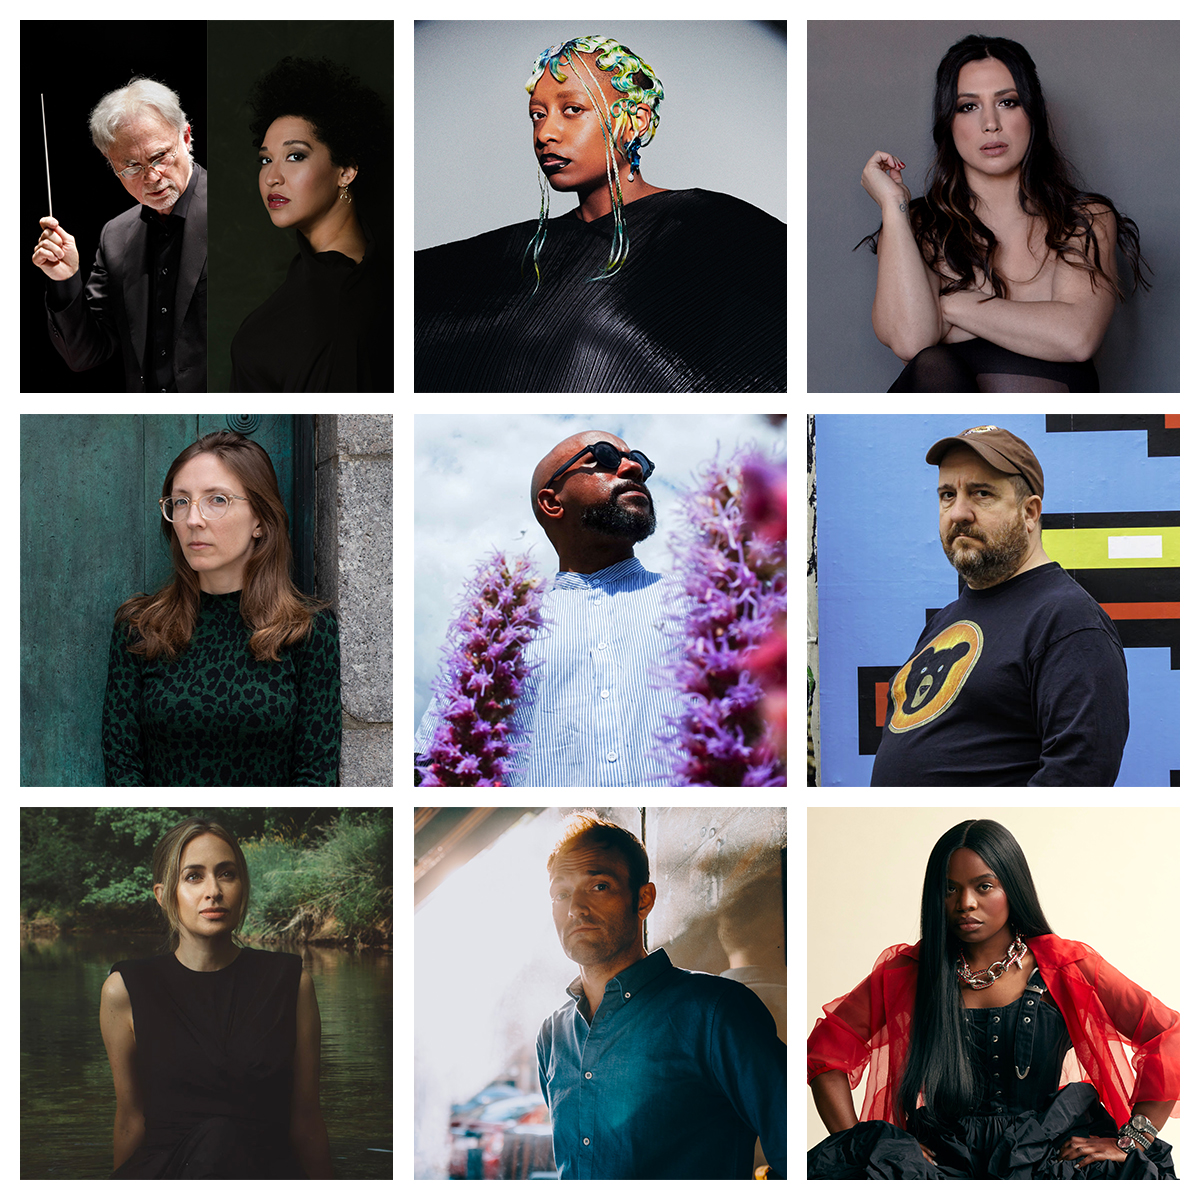 TGIF! There’s lots of great live music ahead around the world from @HellTweet, @_JuliaBullock, @GeraldFinley, @cecilesalvant, @MichelleBranch, Mary Halvorson, Ben LaMar Gay, @TheMagFields' Stephin Merritt, @sksnider, @christhile, and @vagabonvagabon: nonesuch.com/journal/nonesu…